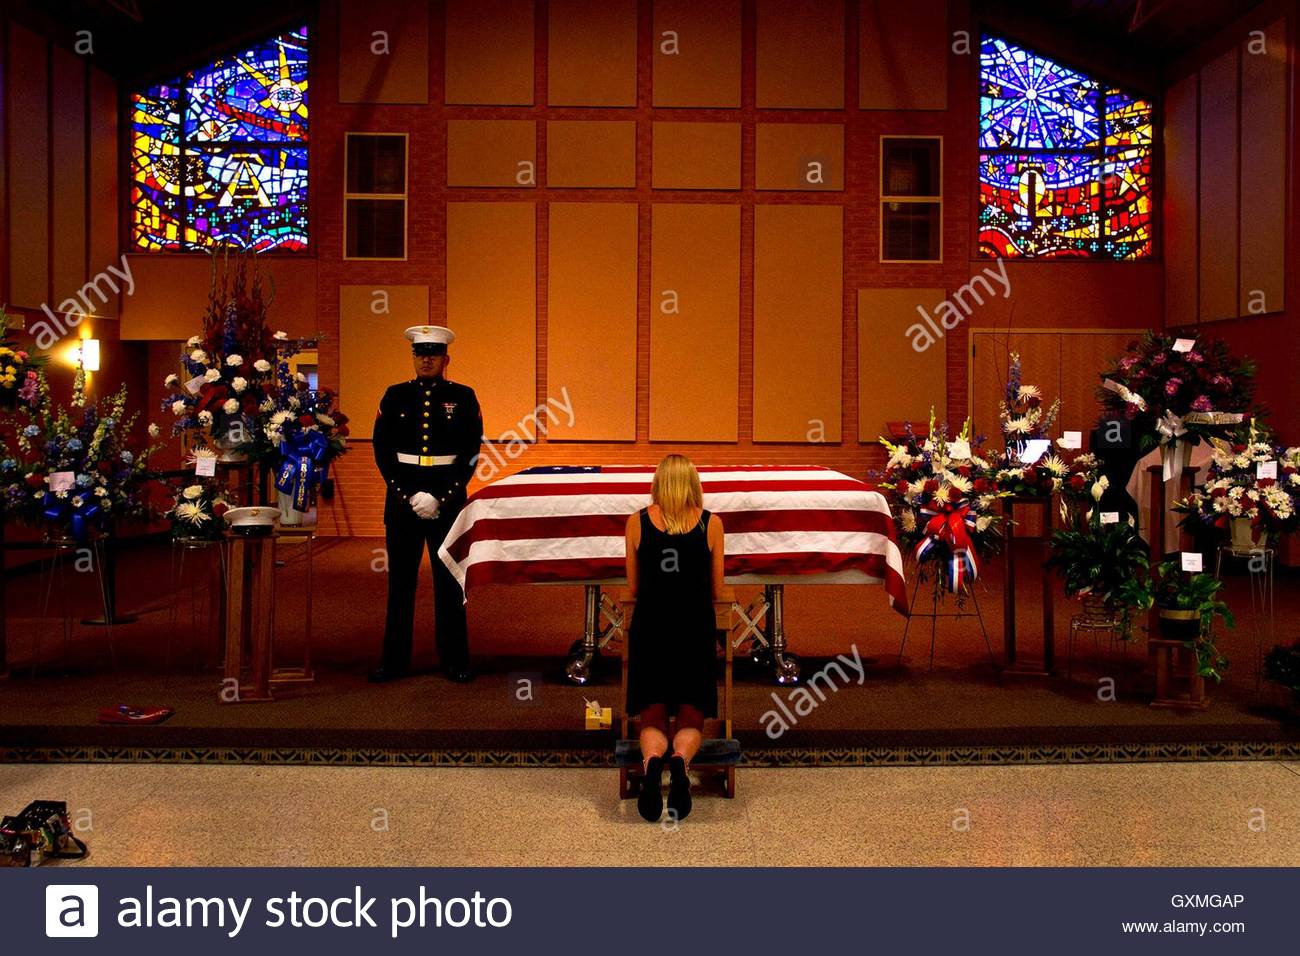 abby-cuttell-kneels-in-front-of-the-flag-covered-casket-and-says-goodbye-GXMGAP.jpg